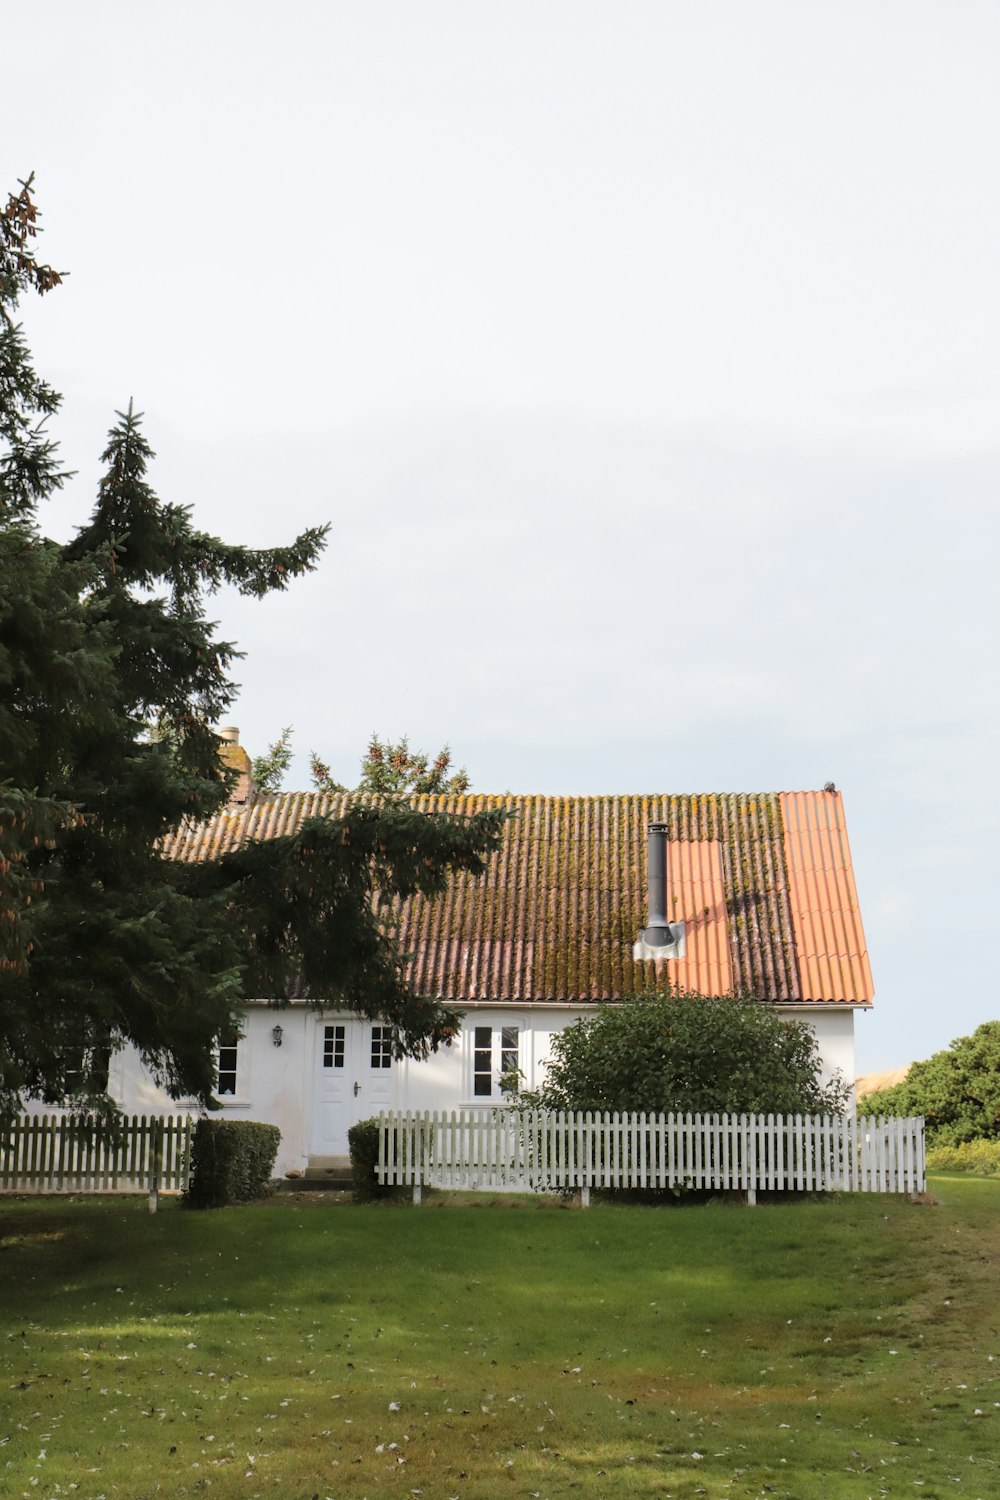 a white house with a red tiled roof